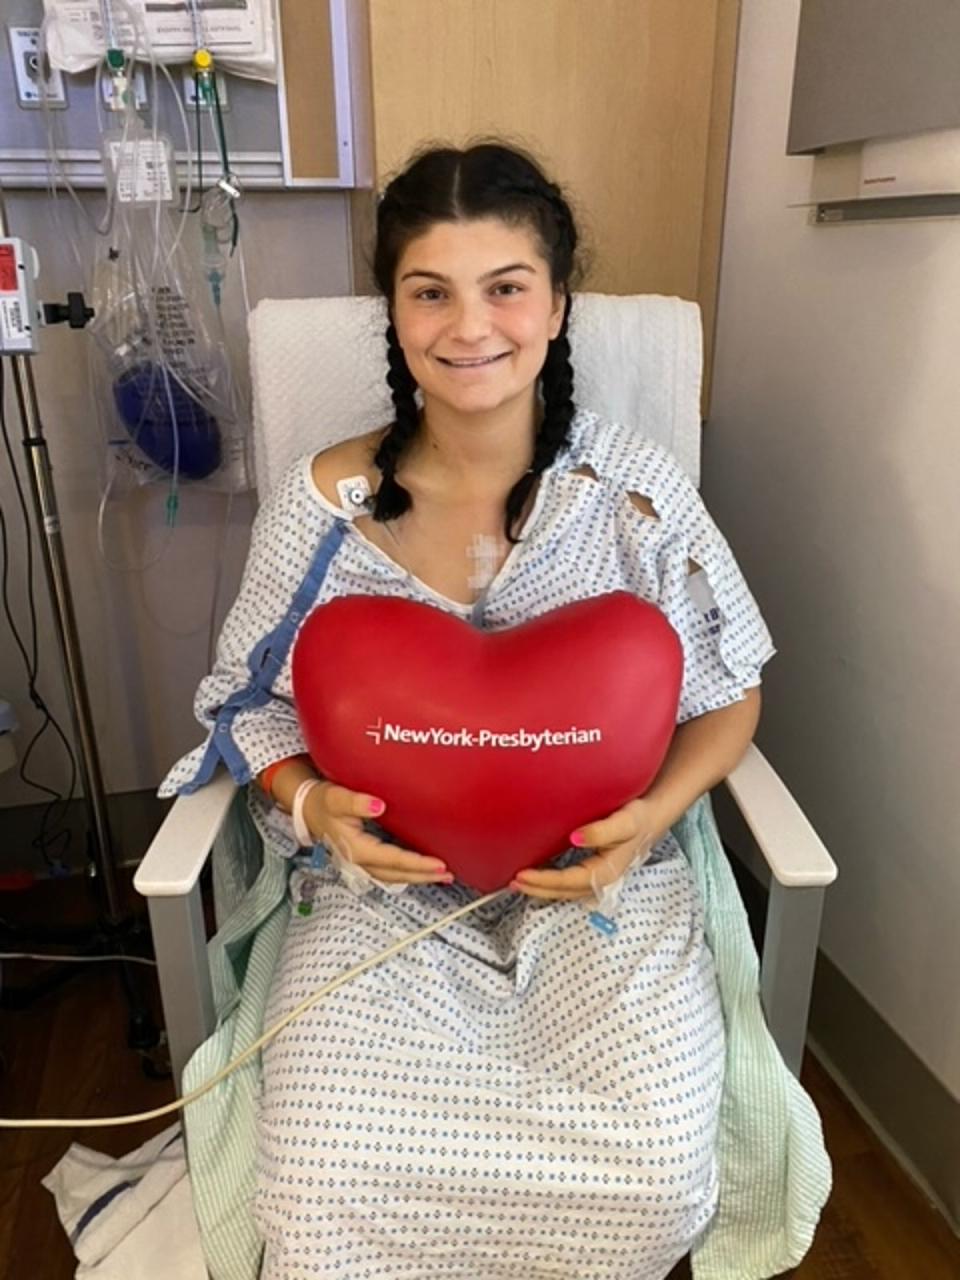 Fordham University softball player Sarah Taffet collapsed after jogging back from first base during a 2021 game in New Jersey (Sarah Taffet)